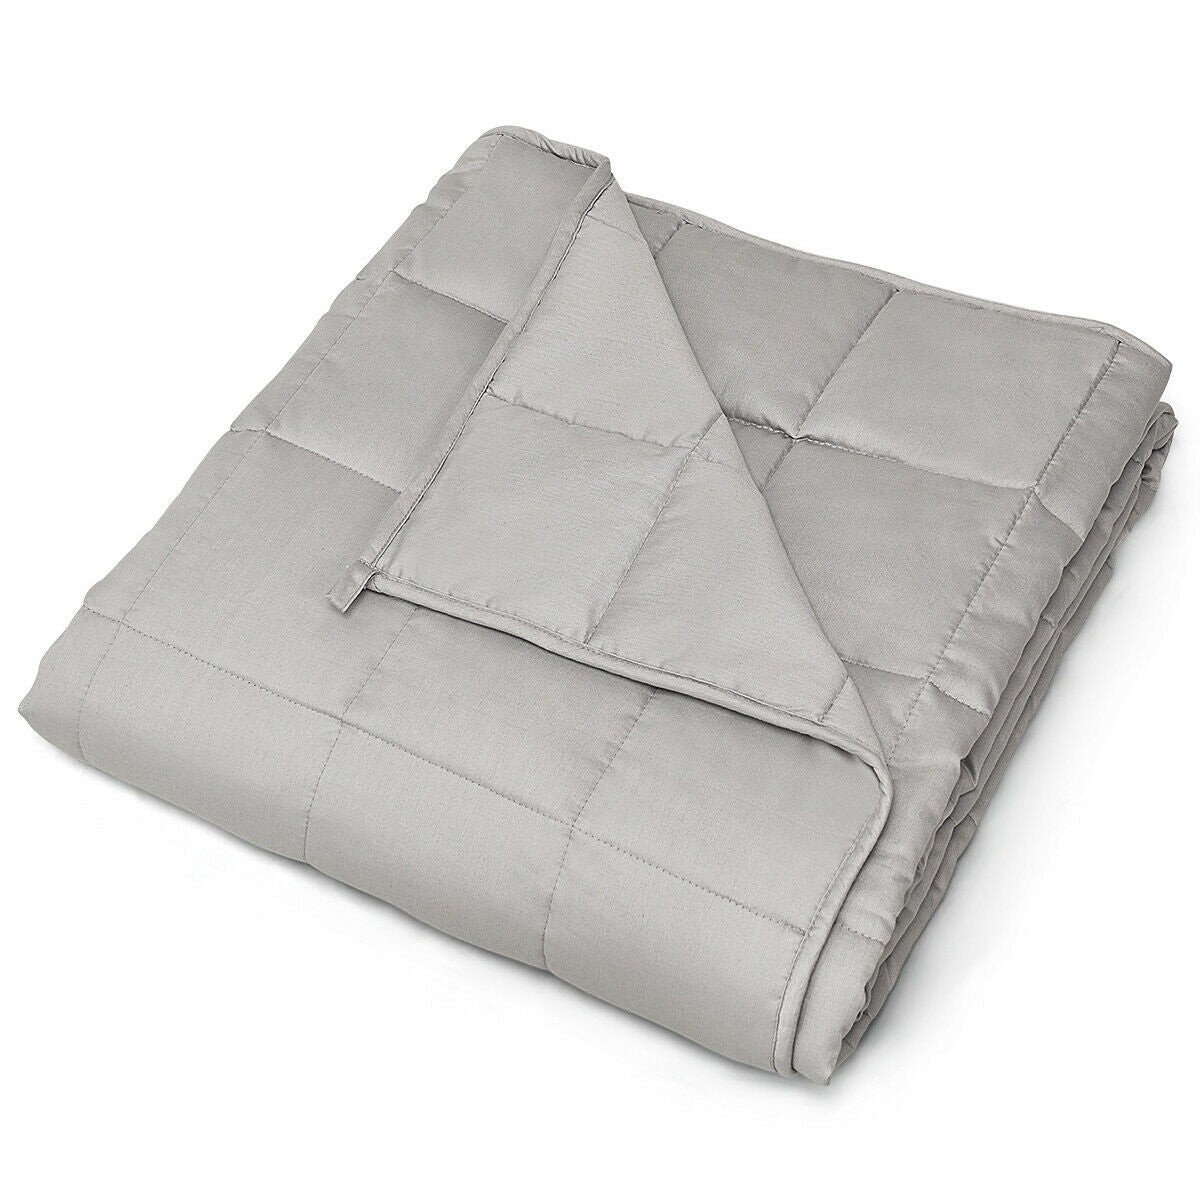 Premium Weighted Blanket Smaller Pockets | 48"x72" | Twin Size